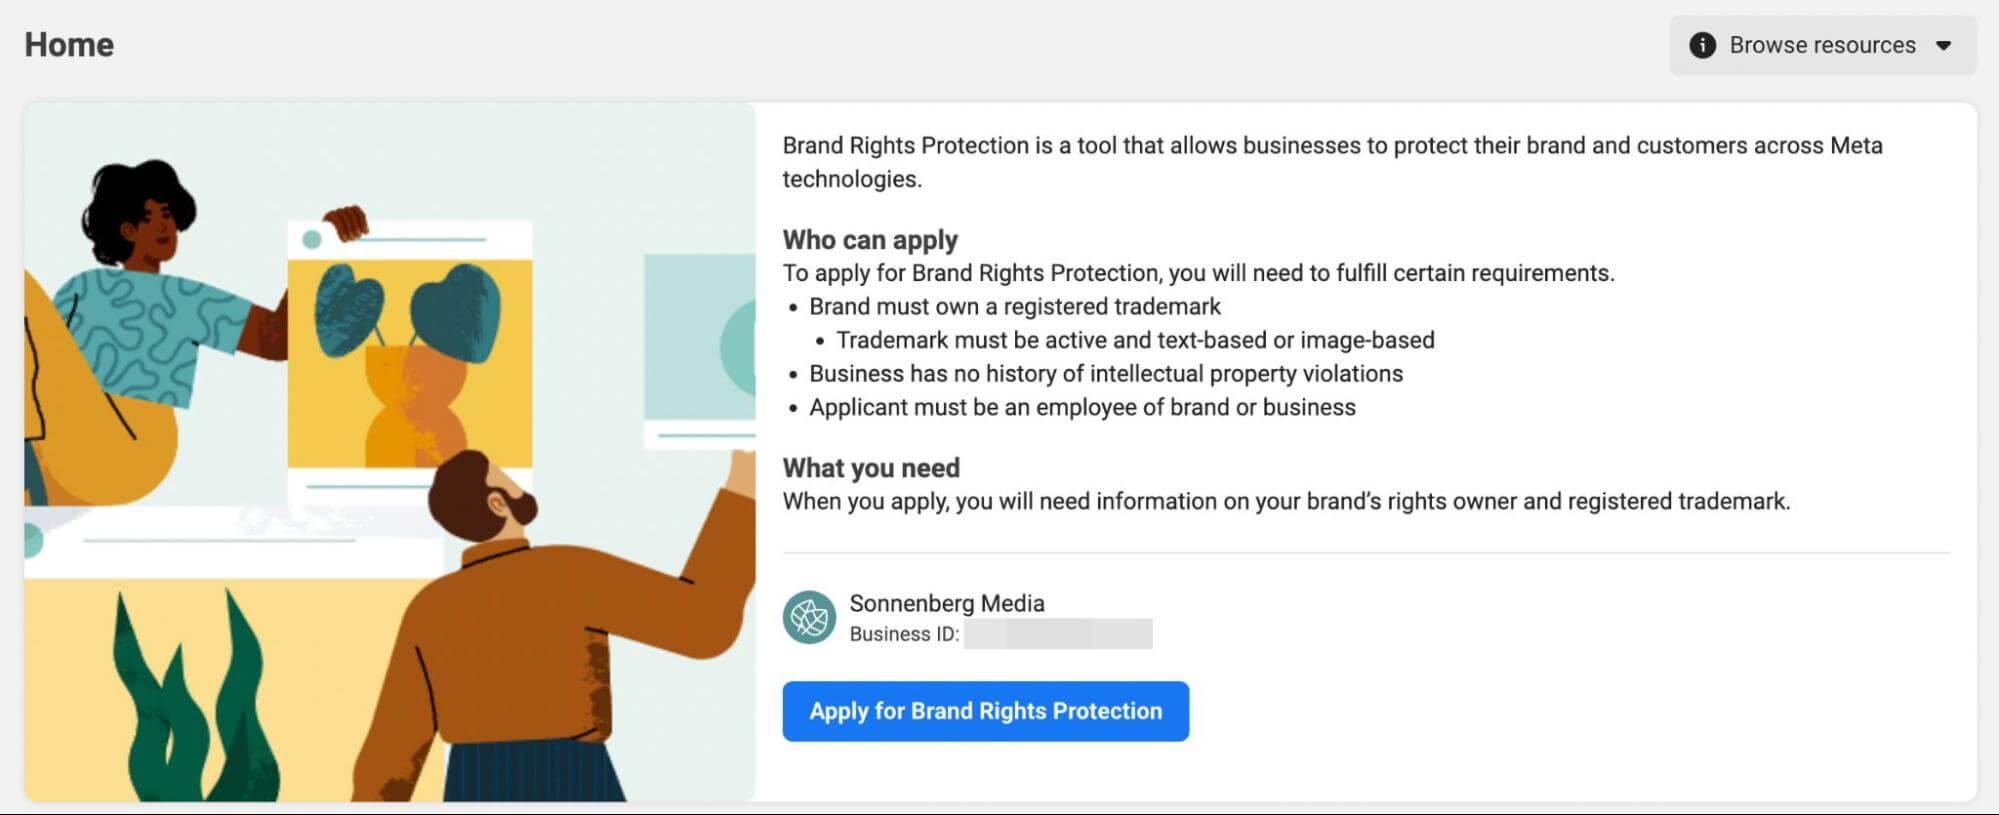 how-to-use-metas-intellectual-property-tools-for-facebook-and-instagram-apply-for-brand-rights-protection-tool-business-manager-account-example-11